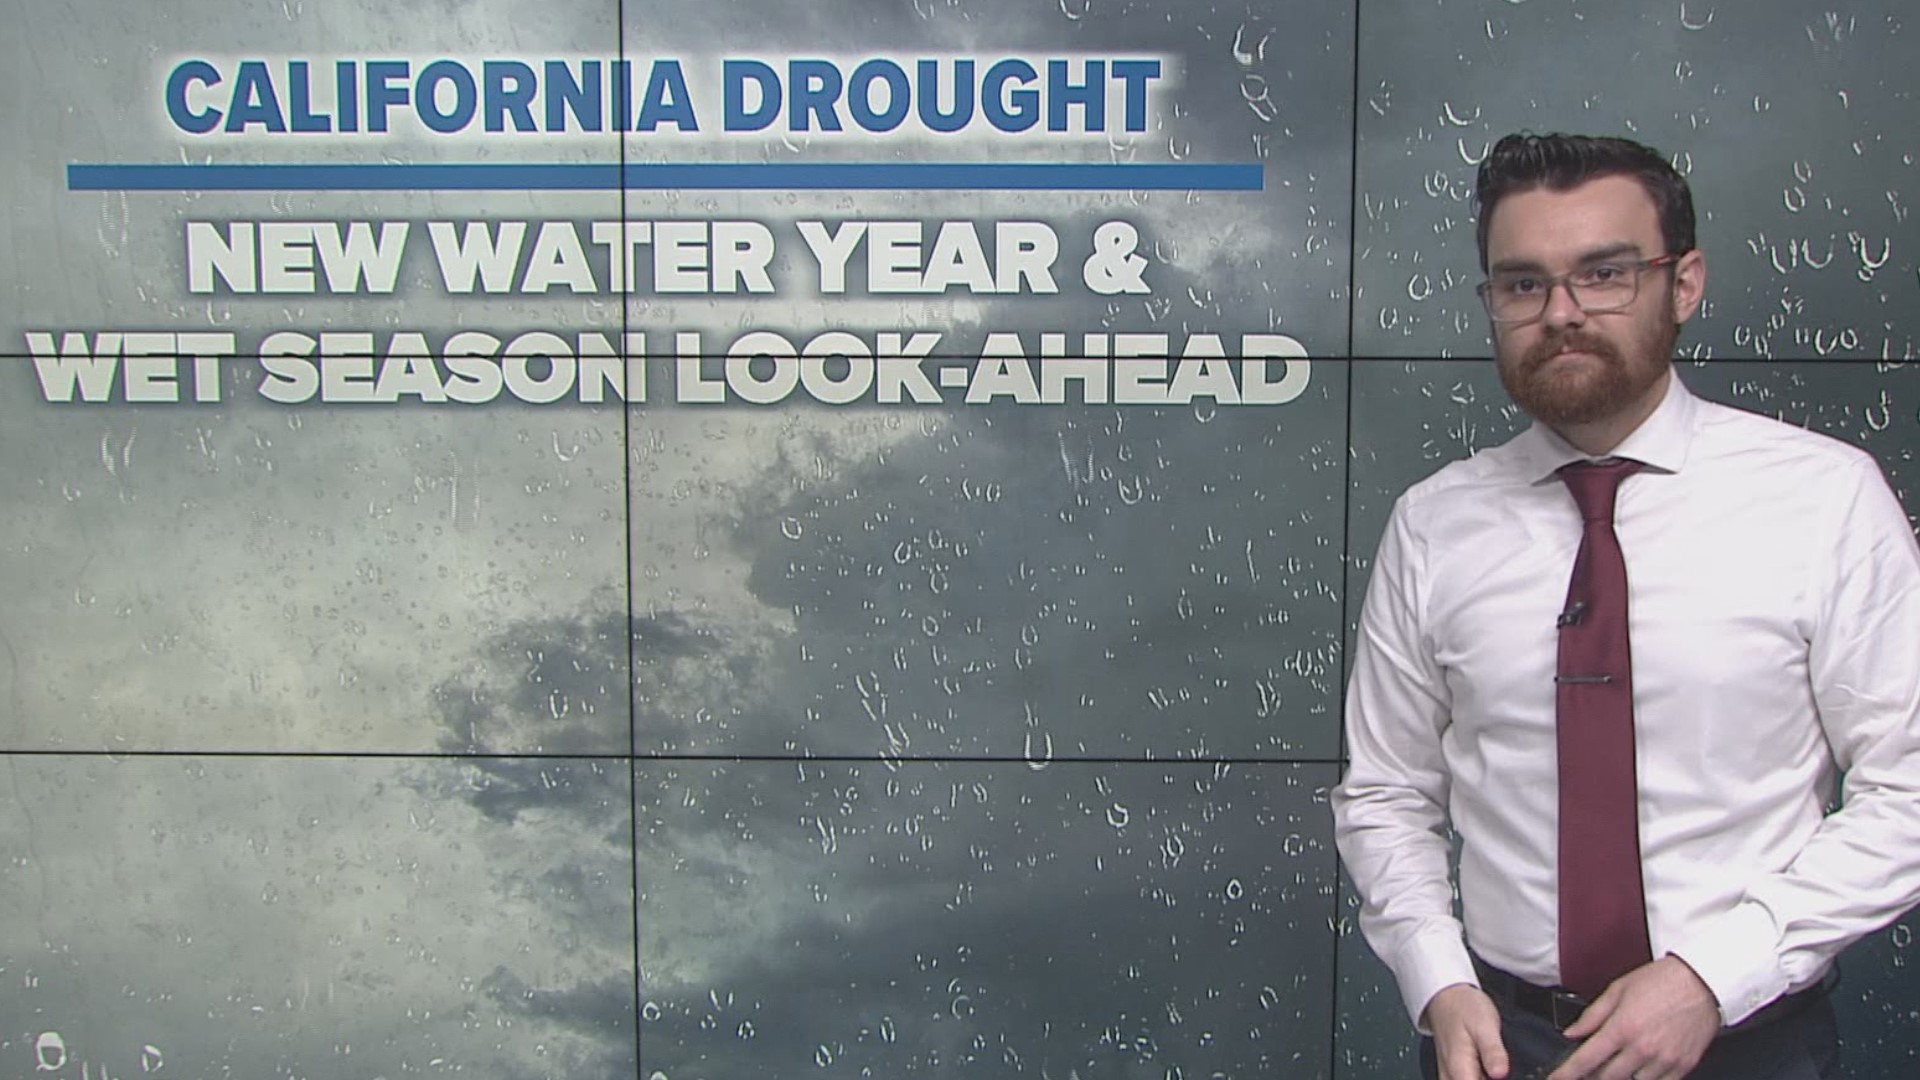 The rain and snow California saw last year brought us out of drought. We take a look at what the climate models say about this winter with a strong El Niño brewing.